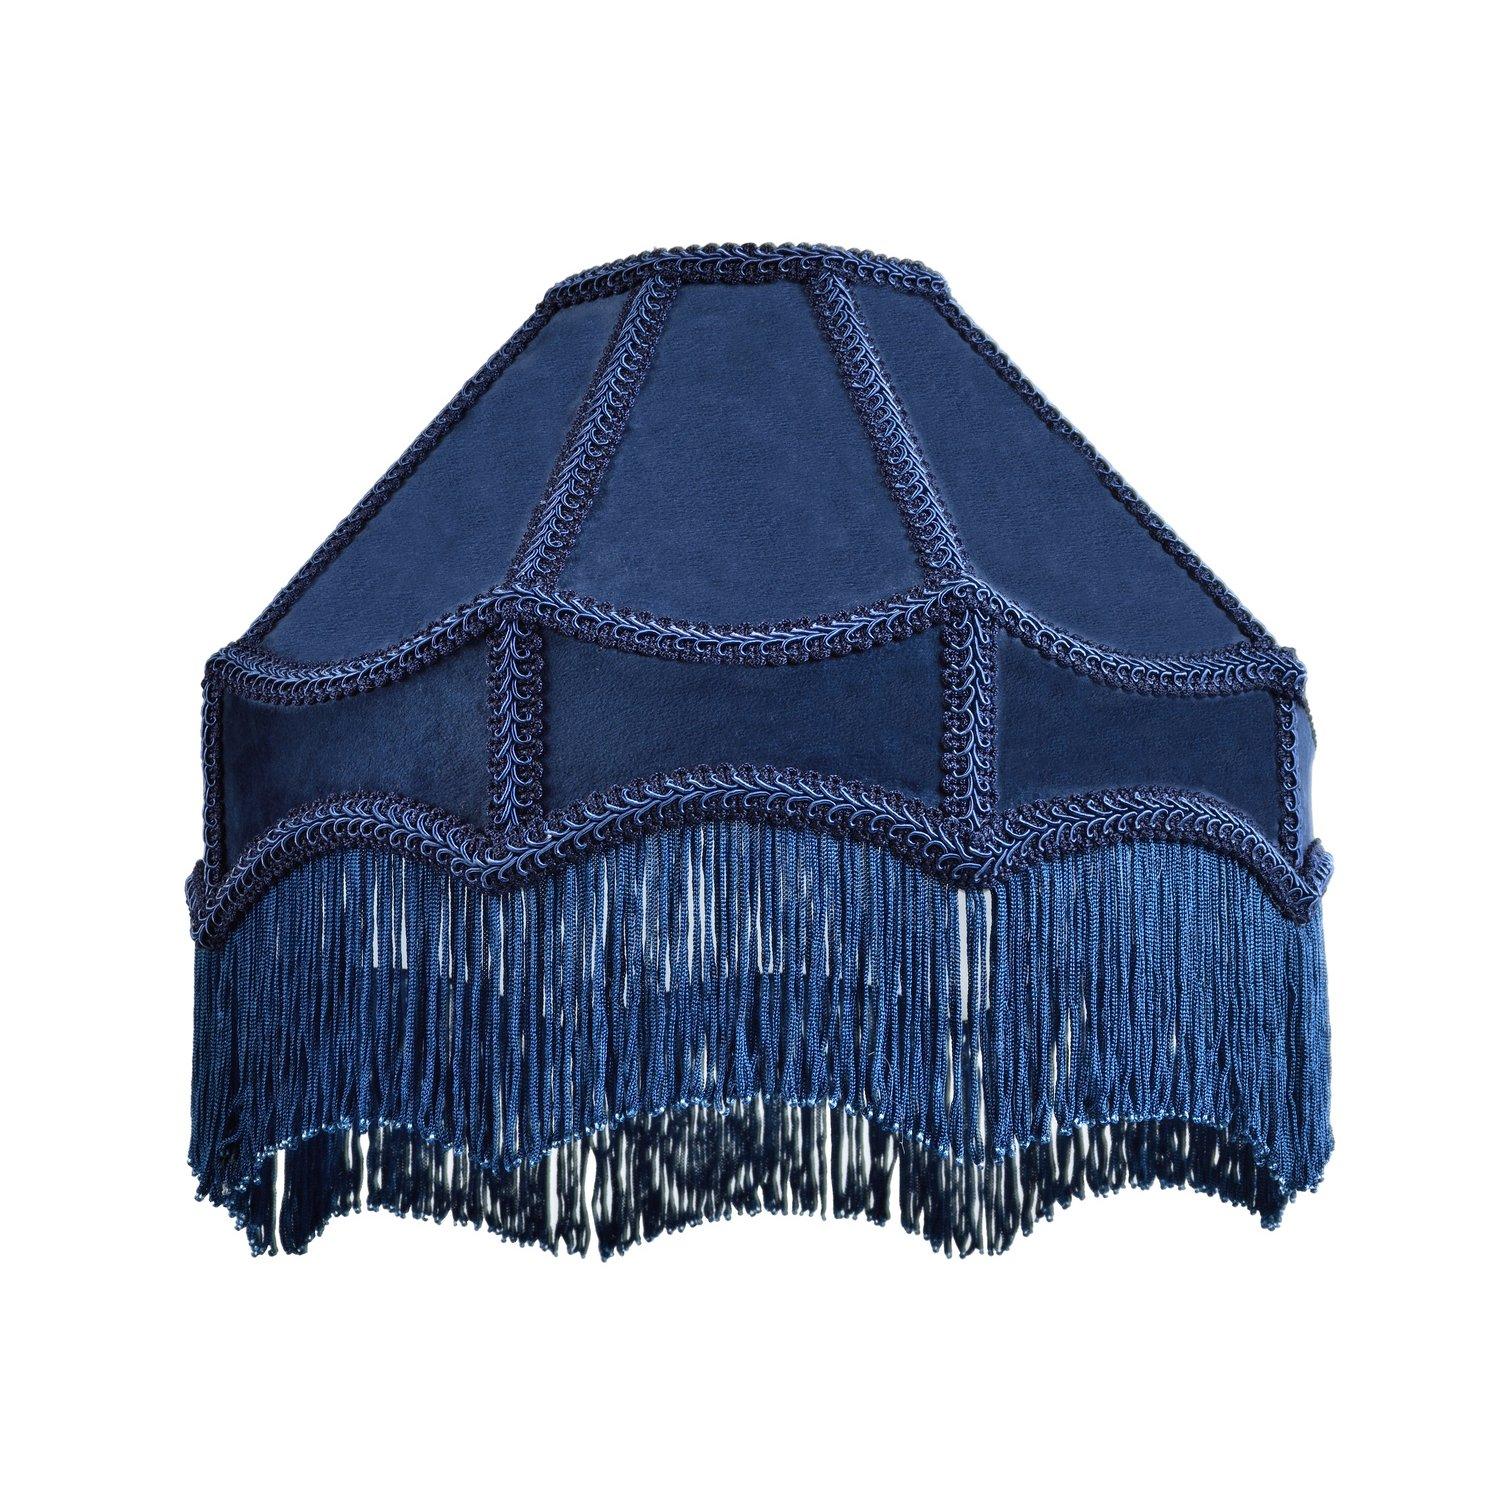 Traditional Victorian Empire Lamp Shade in Velvet with Hanging Tassels